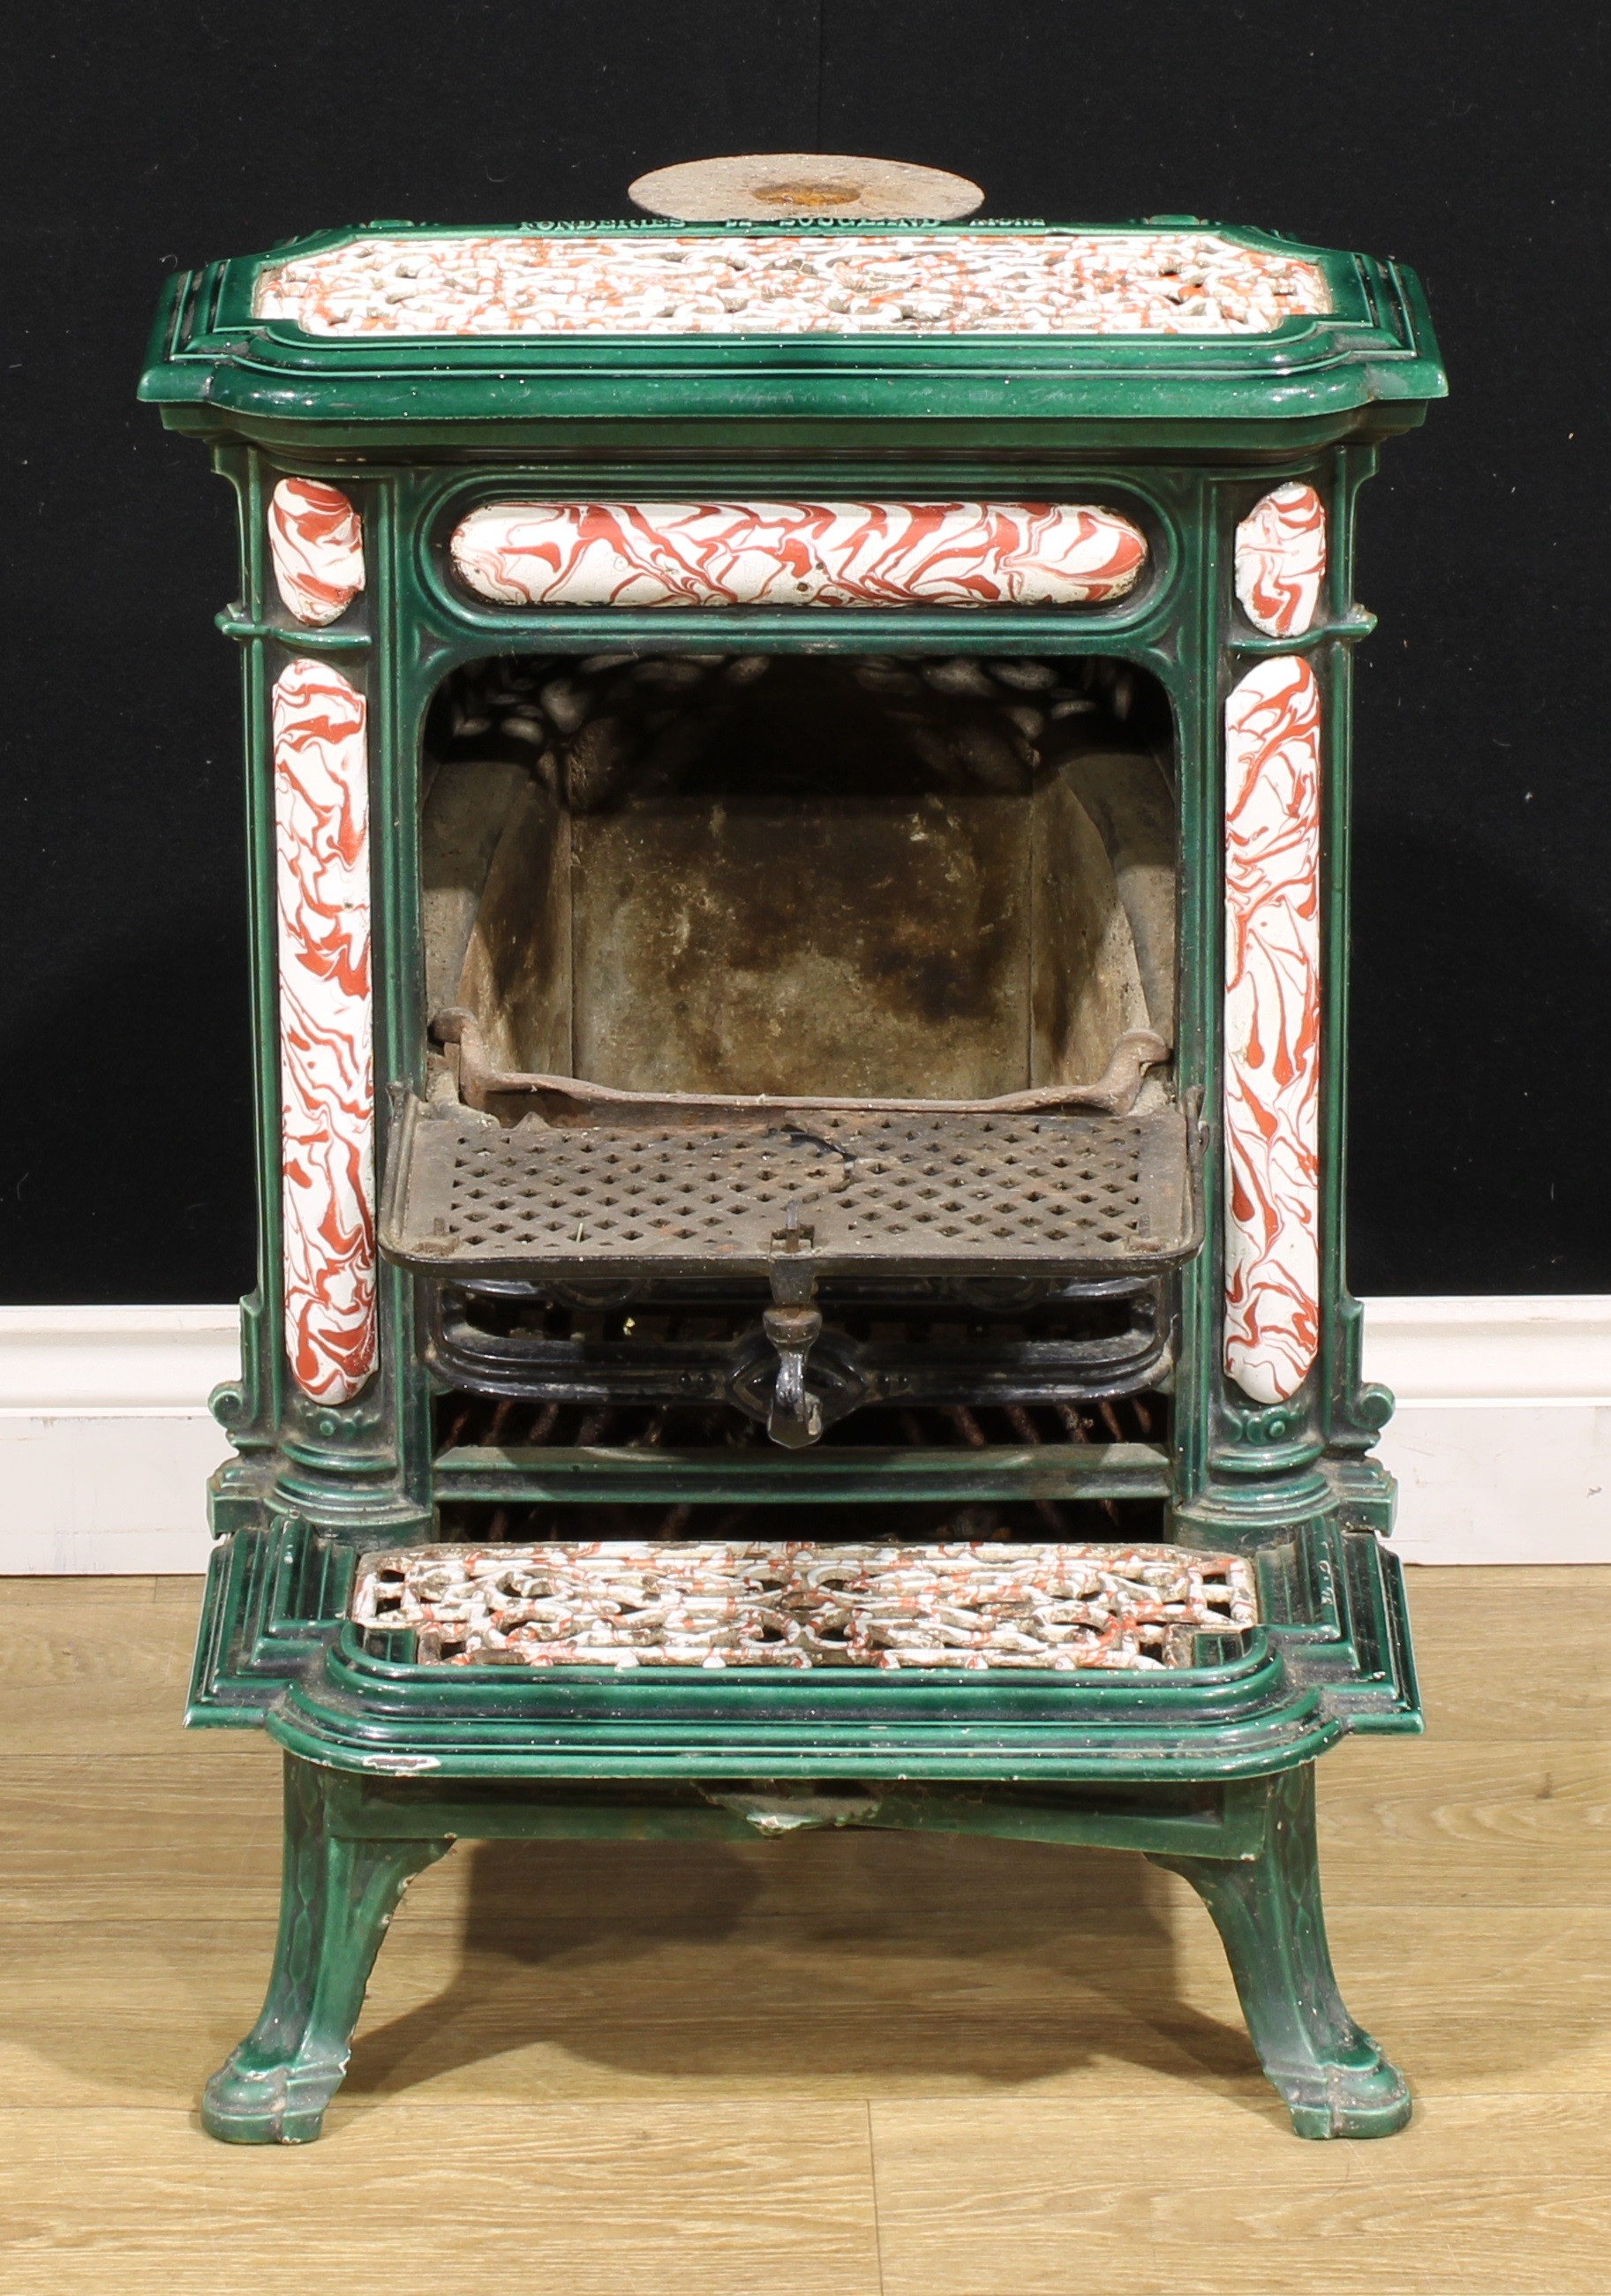 An early 20th century French enamelled cast iron stove, by Fonderies de Sougland, Aisne, 67cm - Image 2 of 3